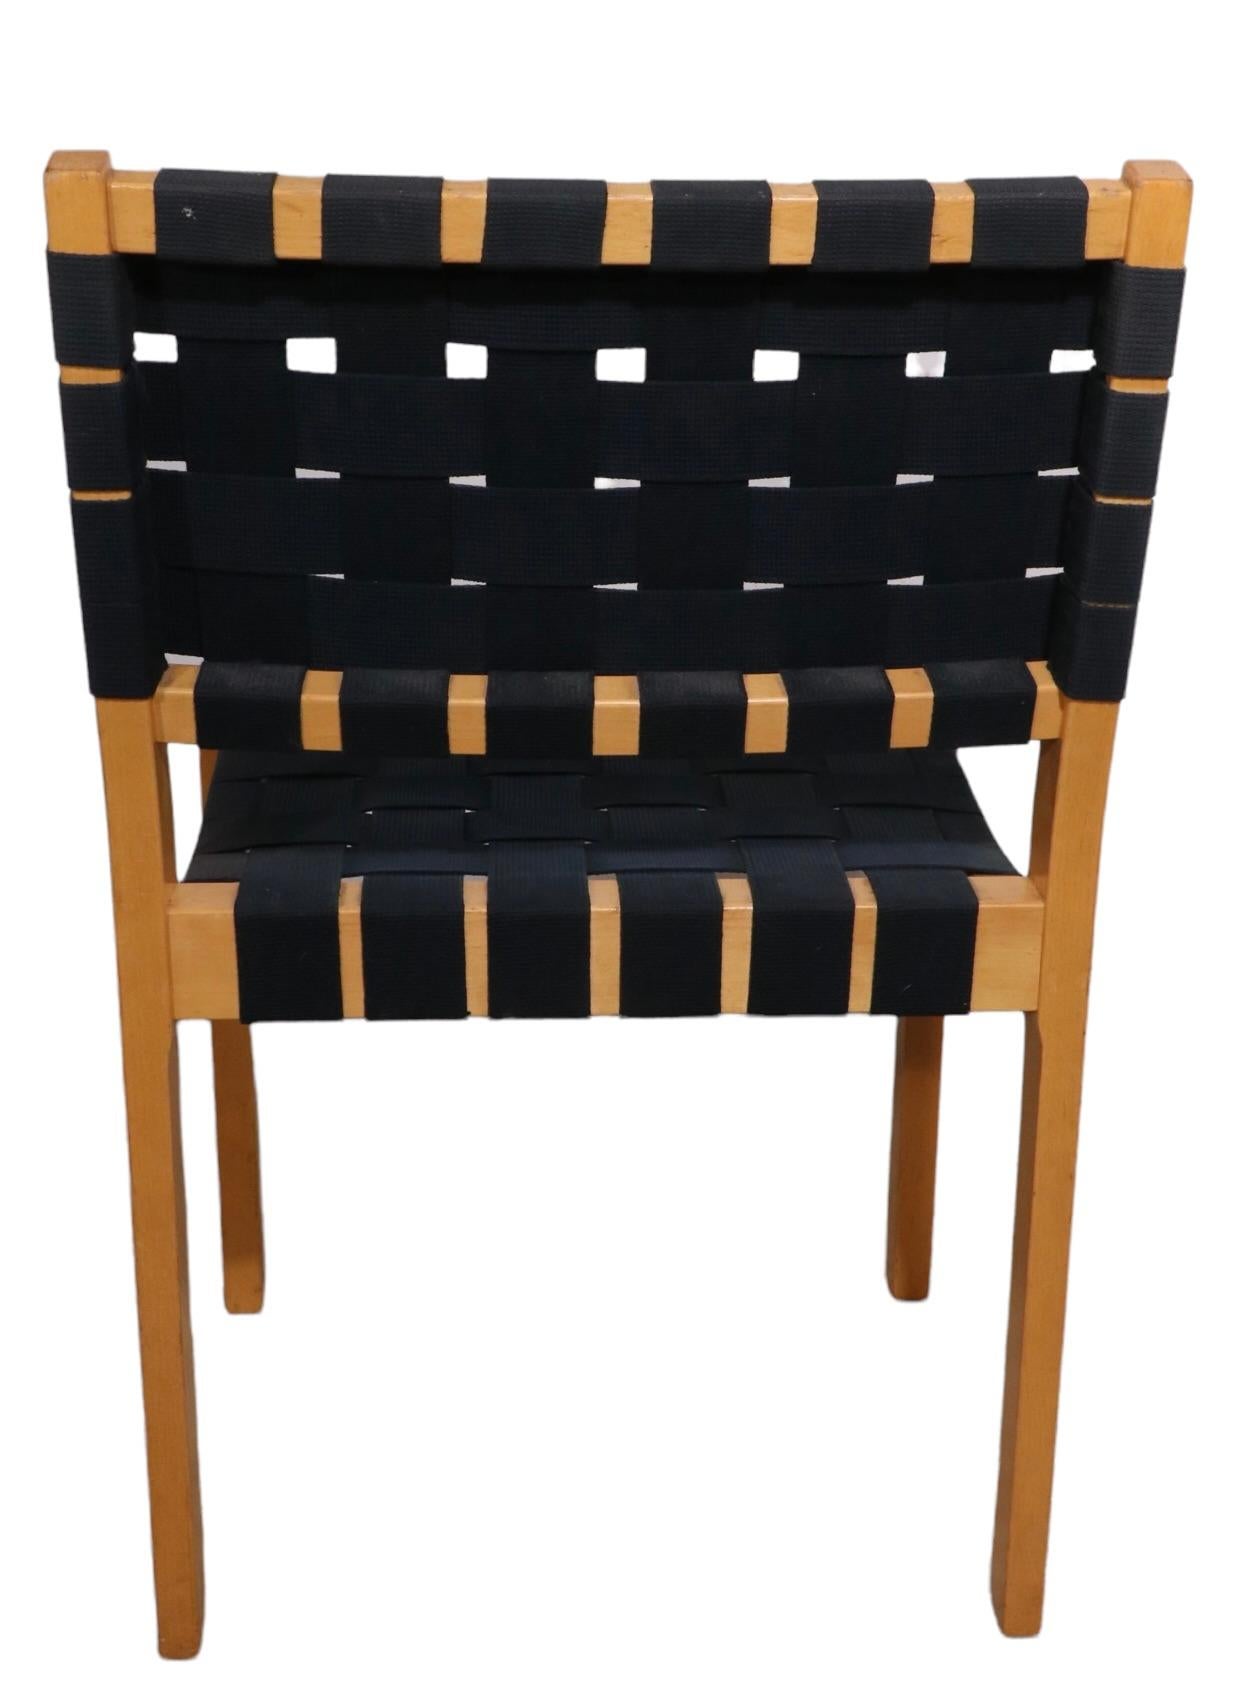 Exceptional set of eight dining chairs designed by Alvar Aalto, made by Artek, distributed by ICF NY. The chairs are all structurally sound and sturdy, the webbing shows some cosmetic wear, fading, etc, but is all strong and ready to use - we